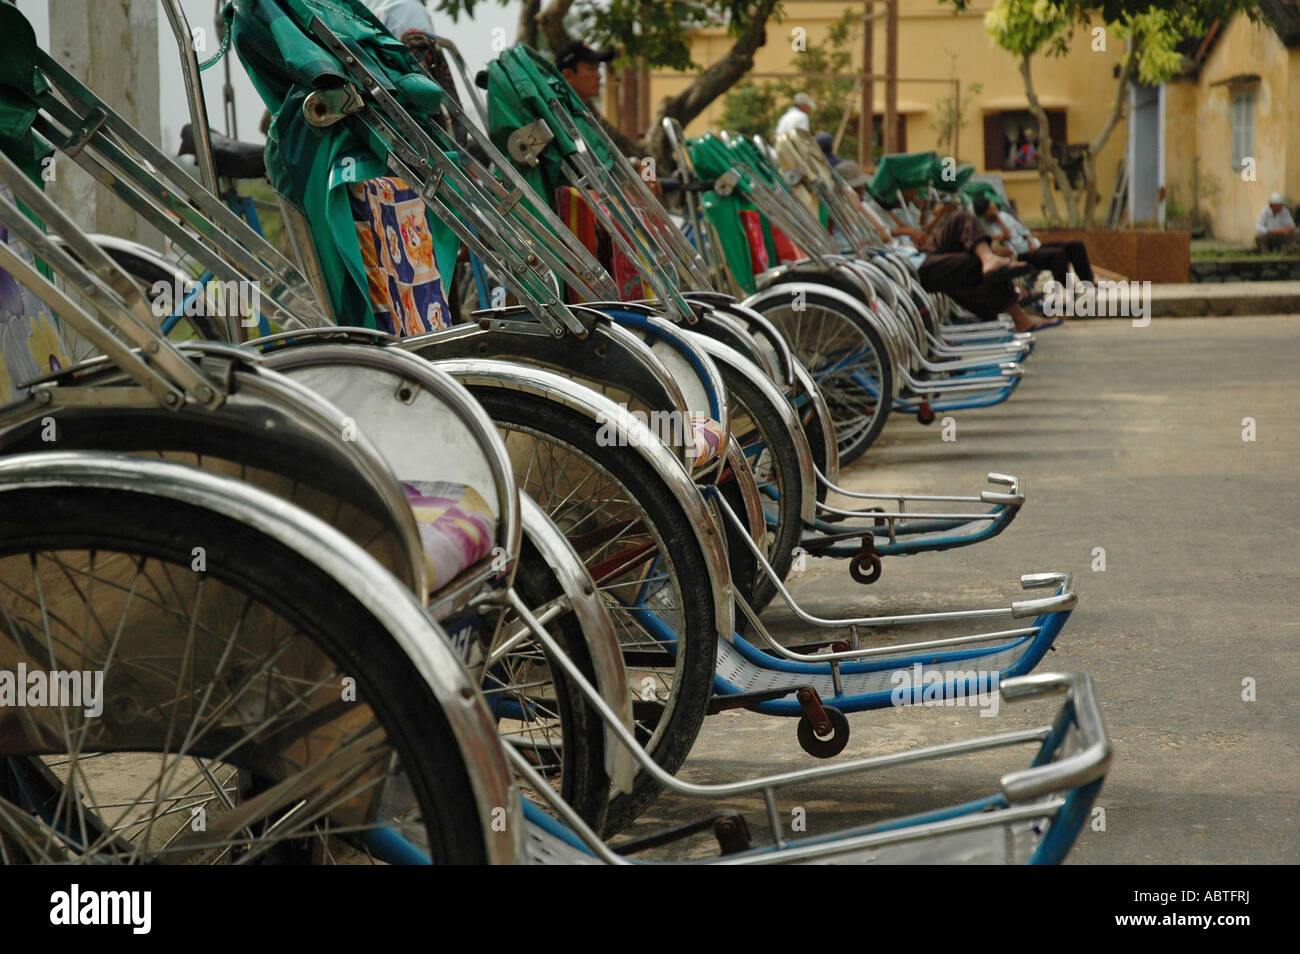 A line of cyclos in Hoi An on Vietnam's central coast. Stock Photo